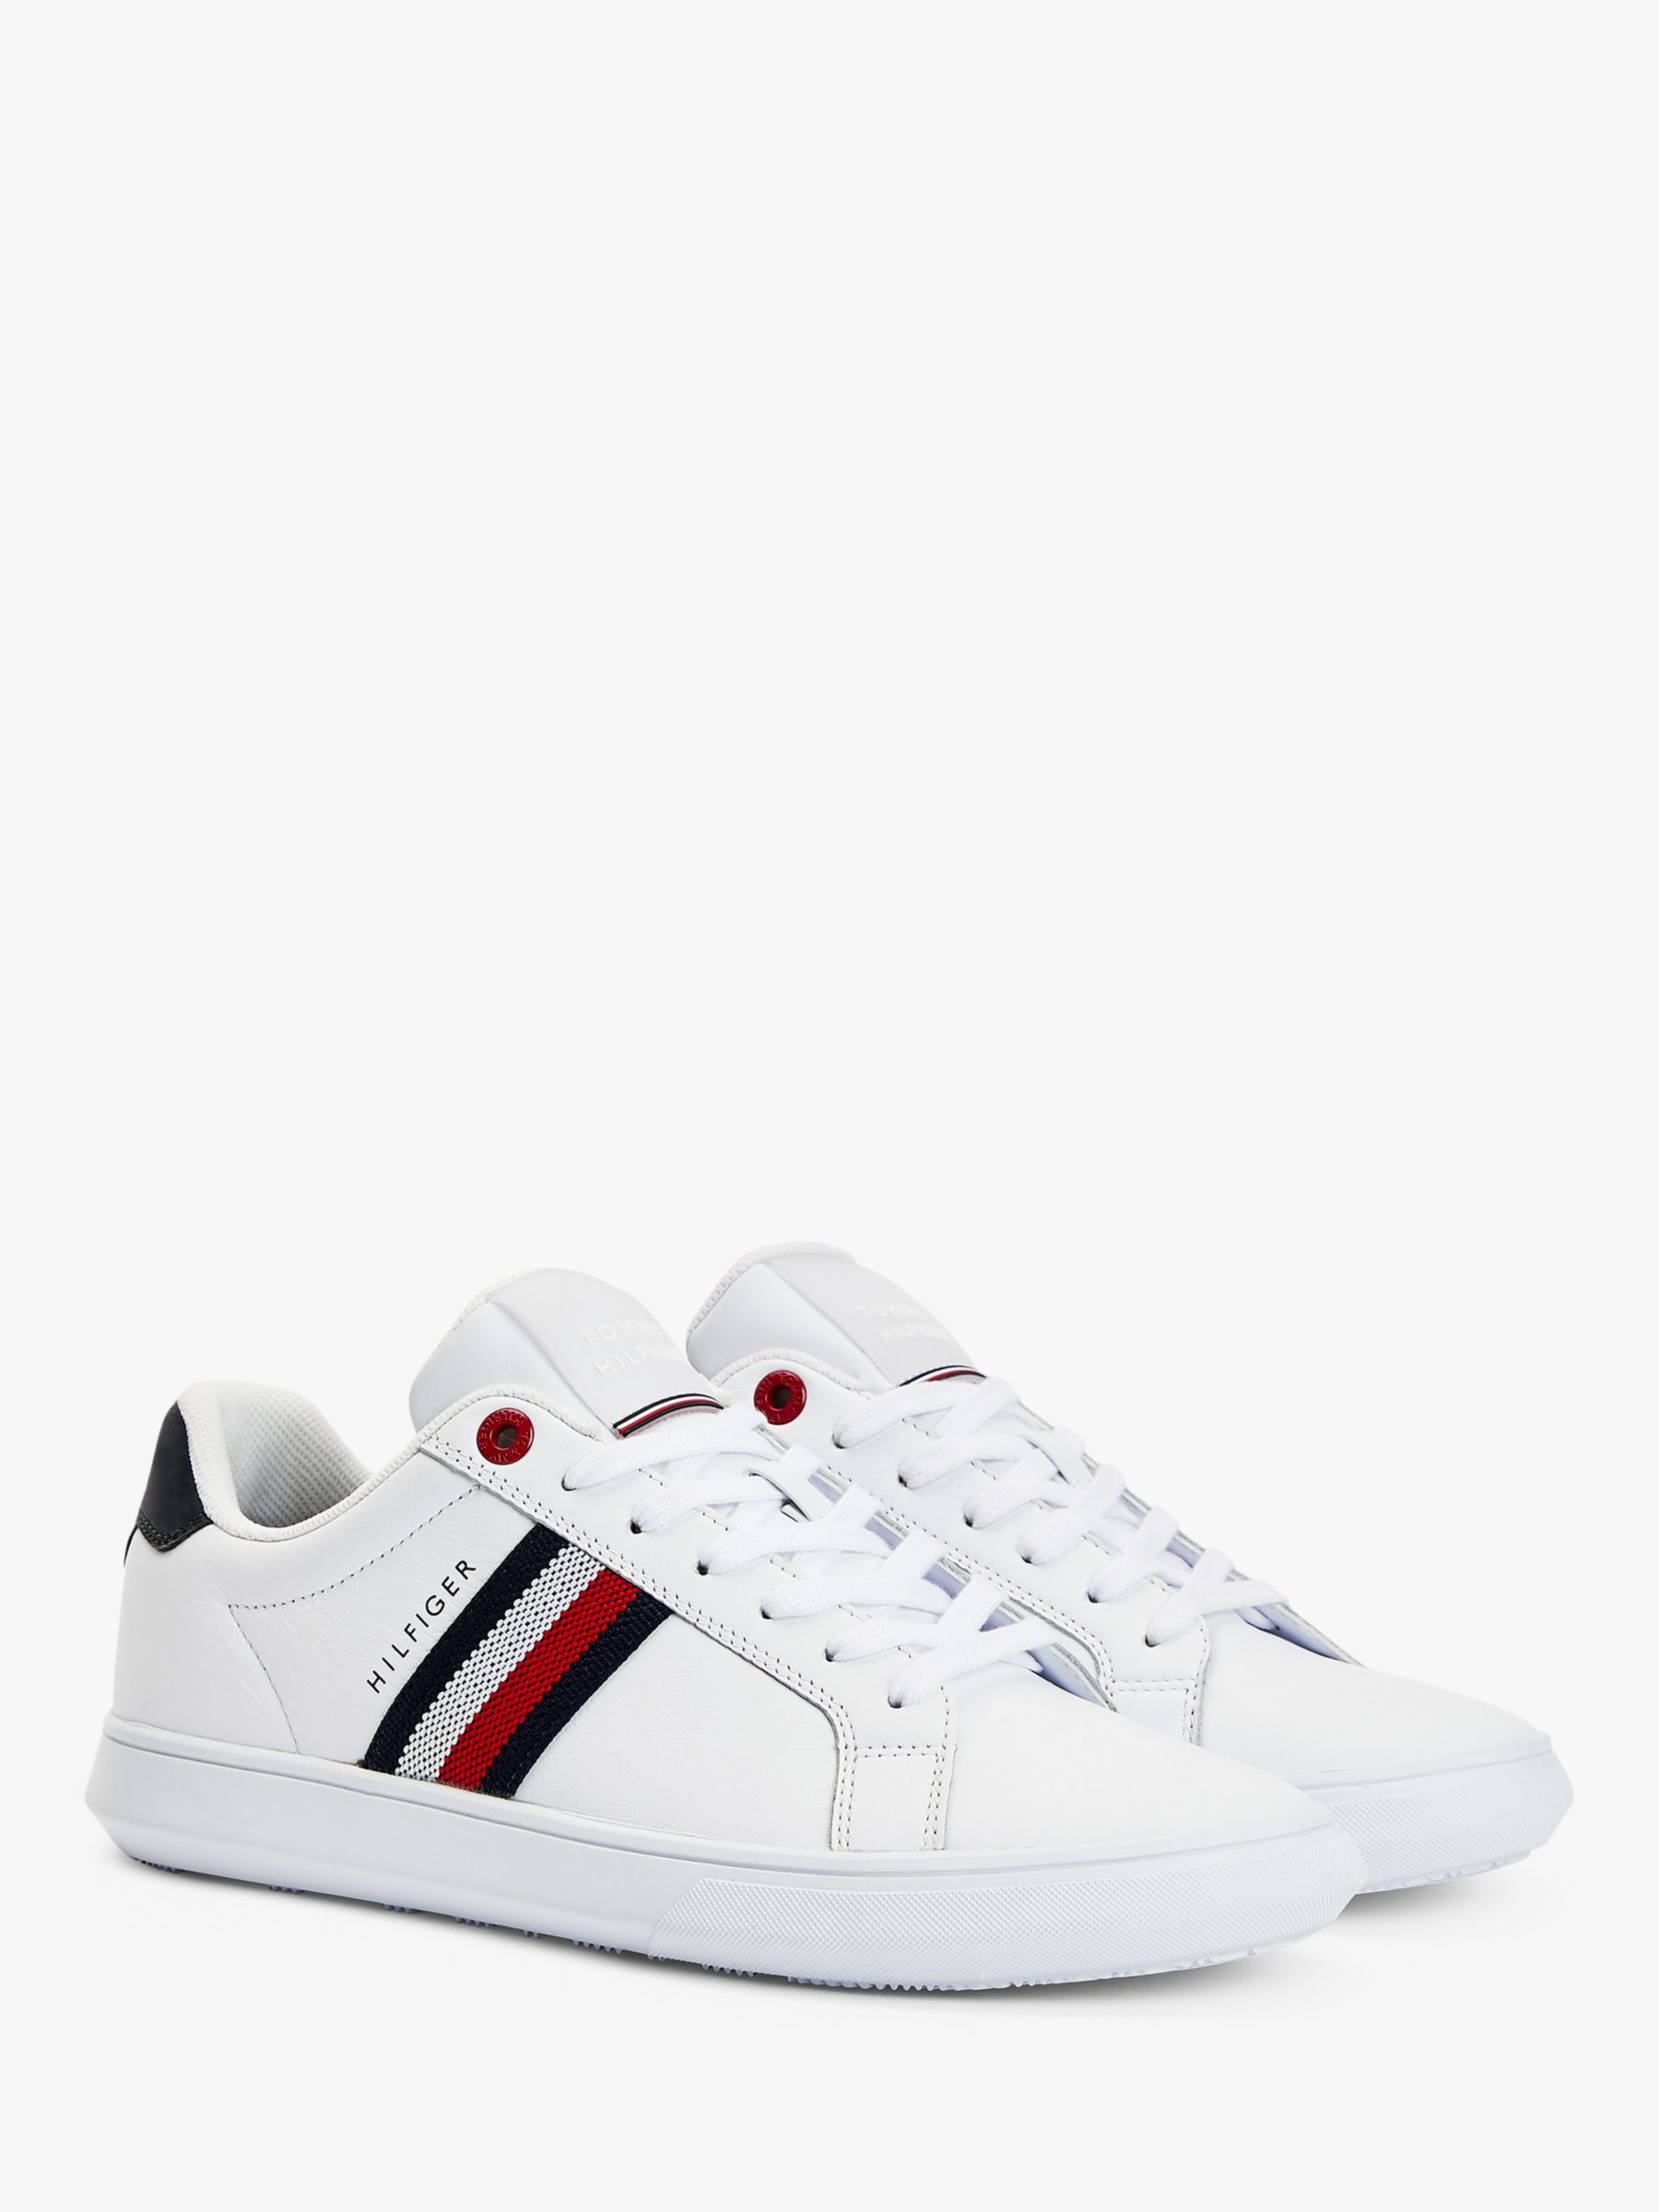 Tommy Hilfiger Essential Trainers, White at John Lewis & Partners